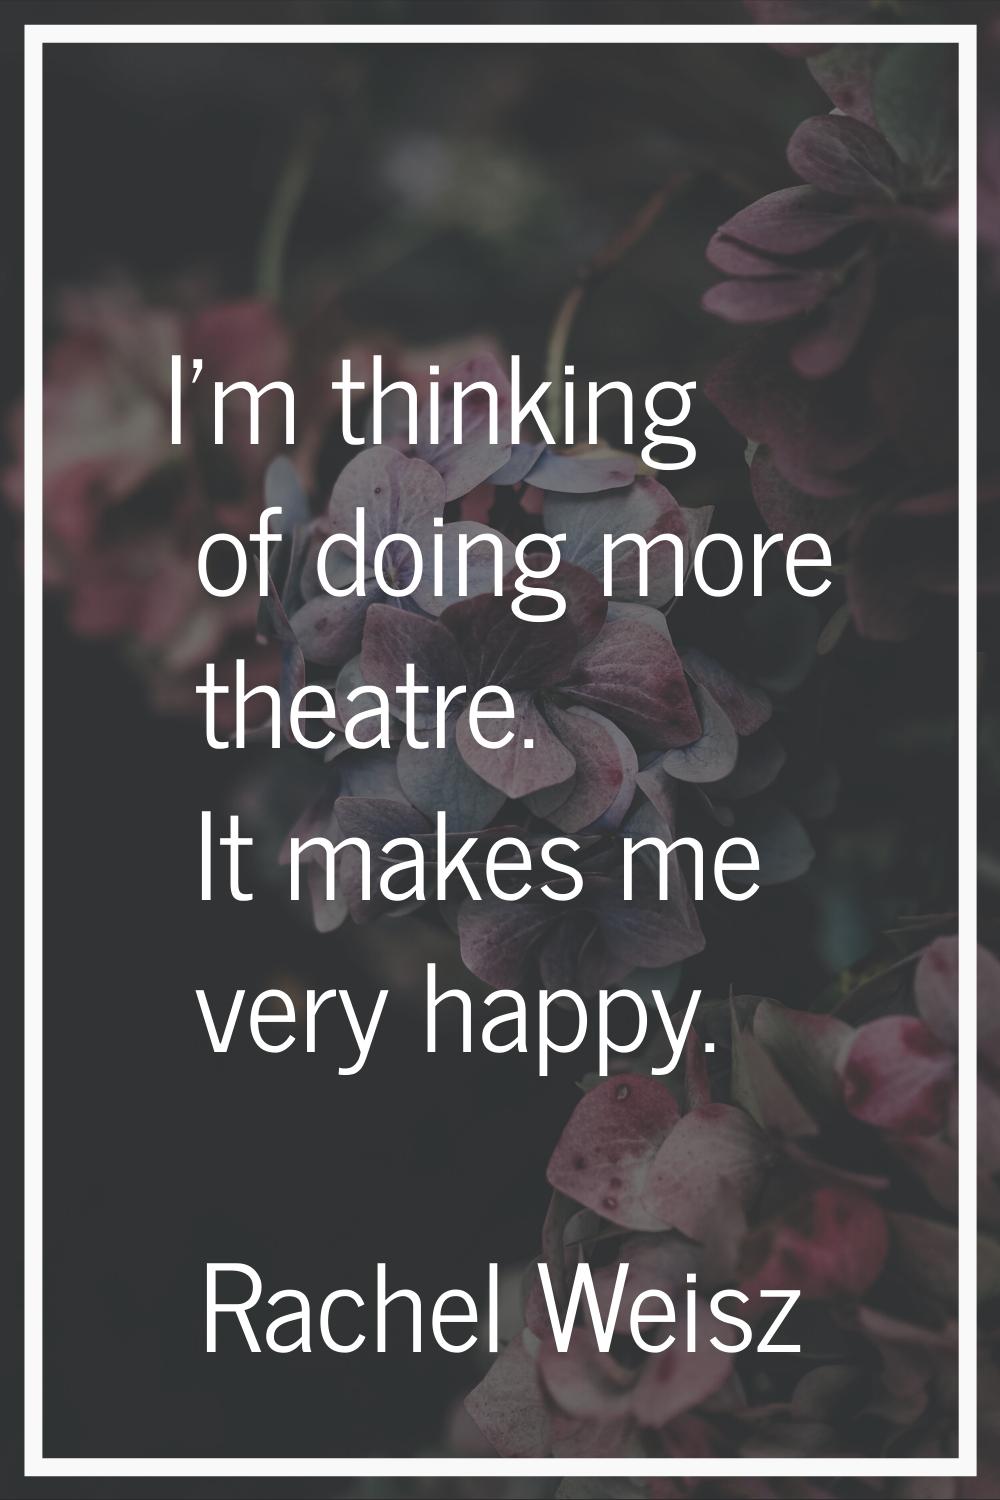 I'm thinking of doing more theatre. It makes me very happy.